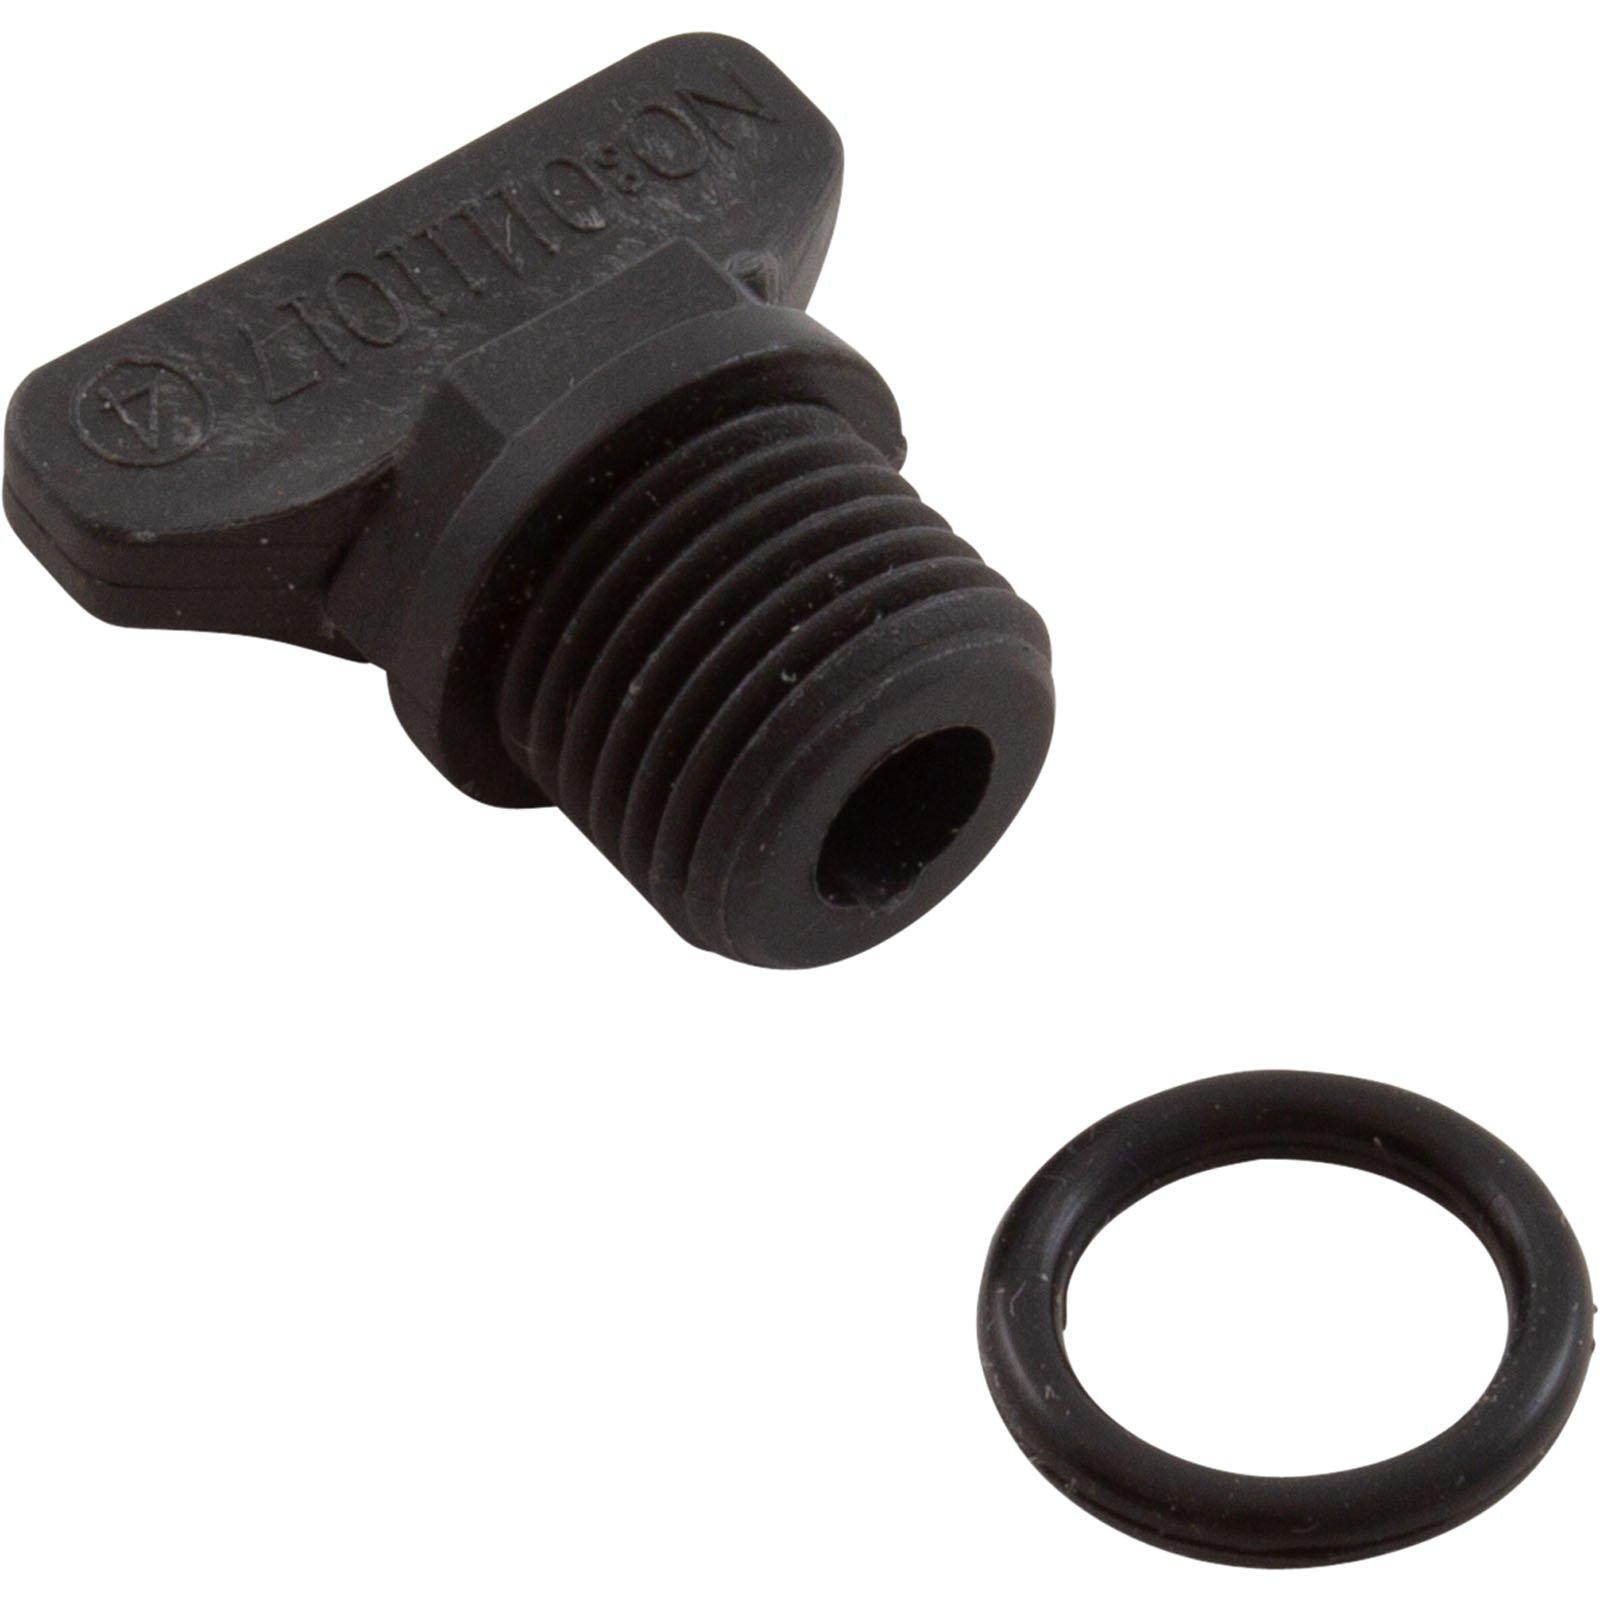 Raypak - Protege Drain Plug with O-Ring Kit for RPVSP1 Variable Speed Pool Pump